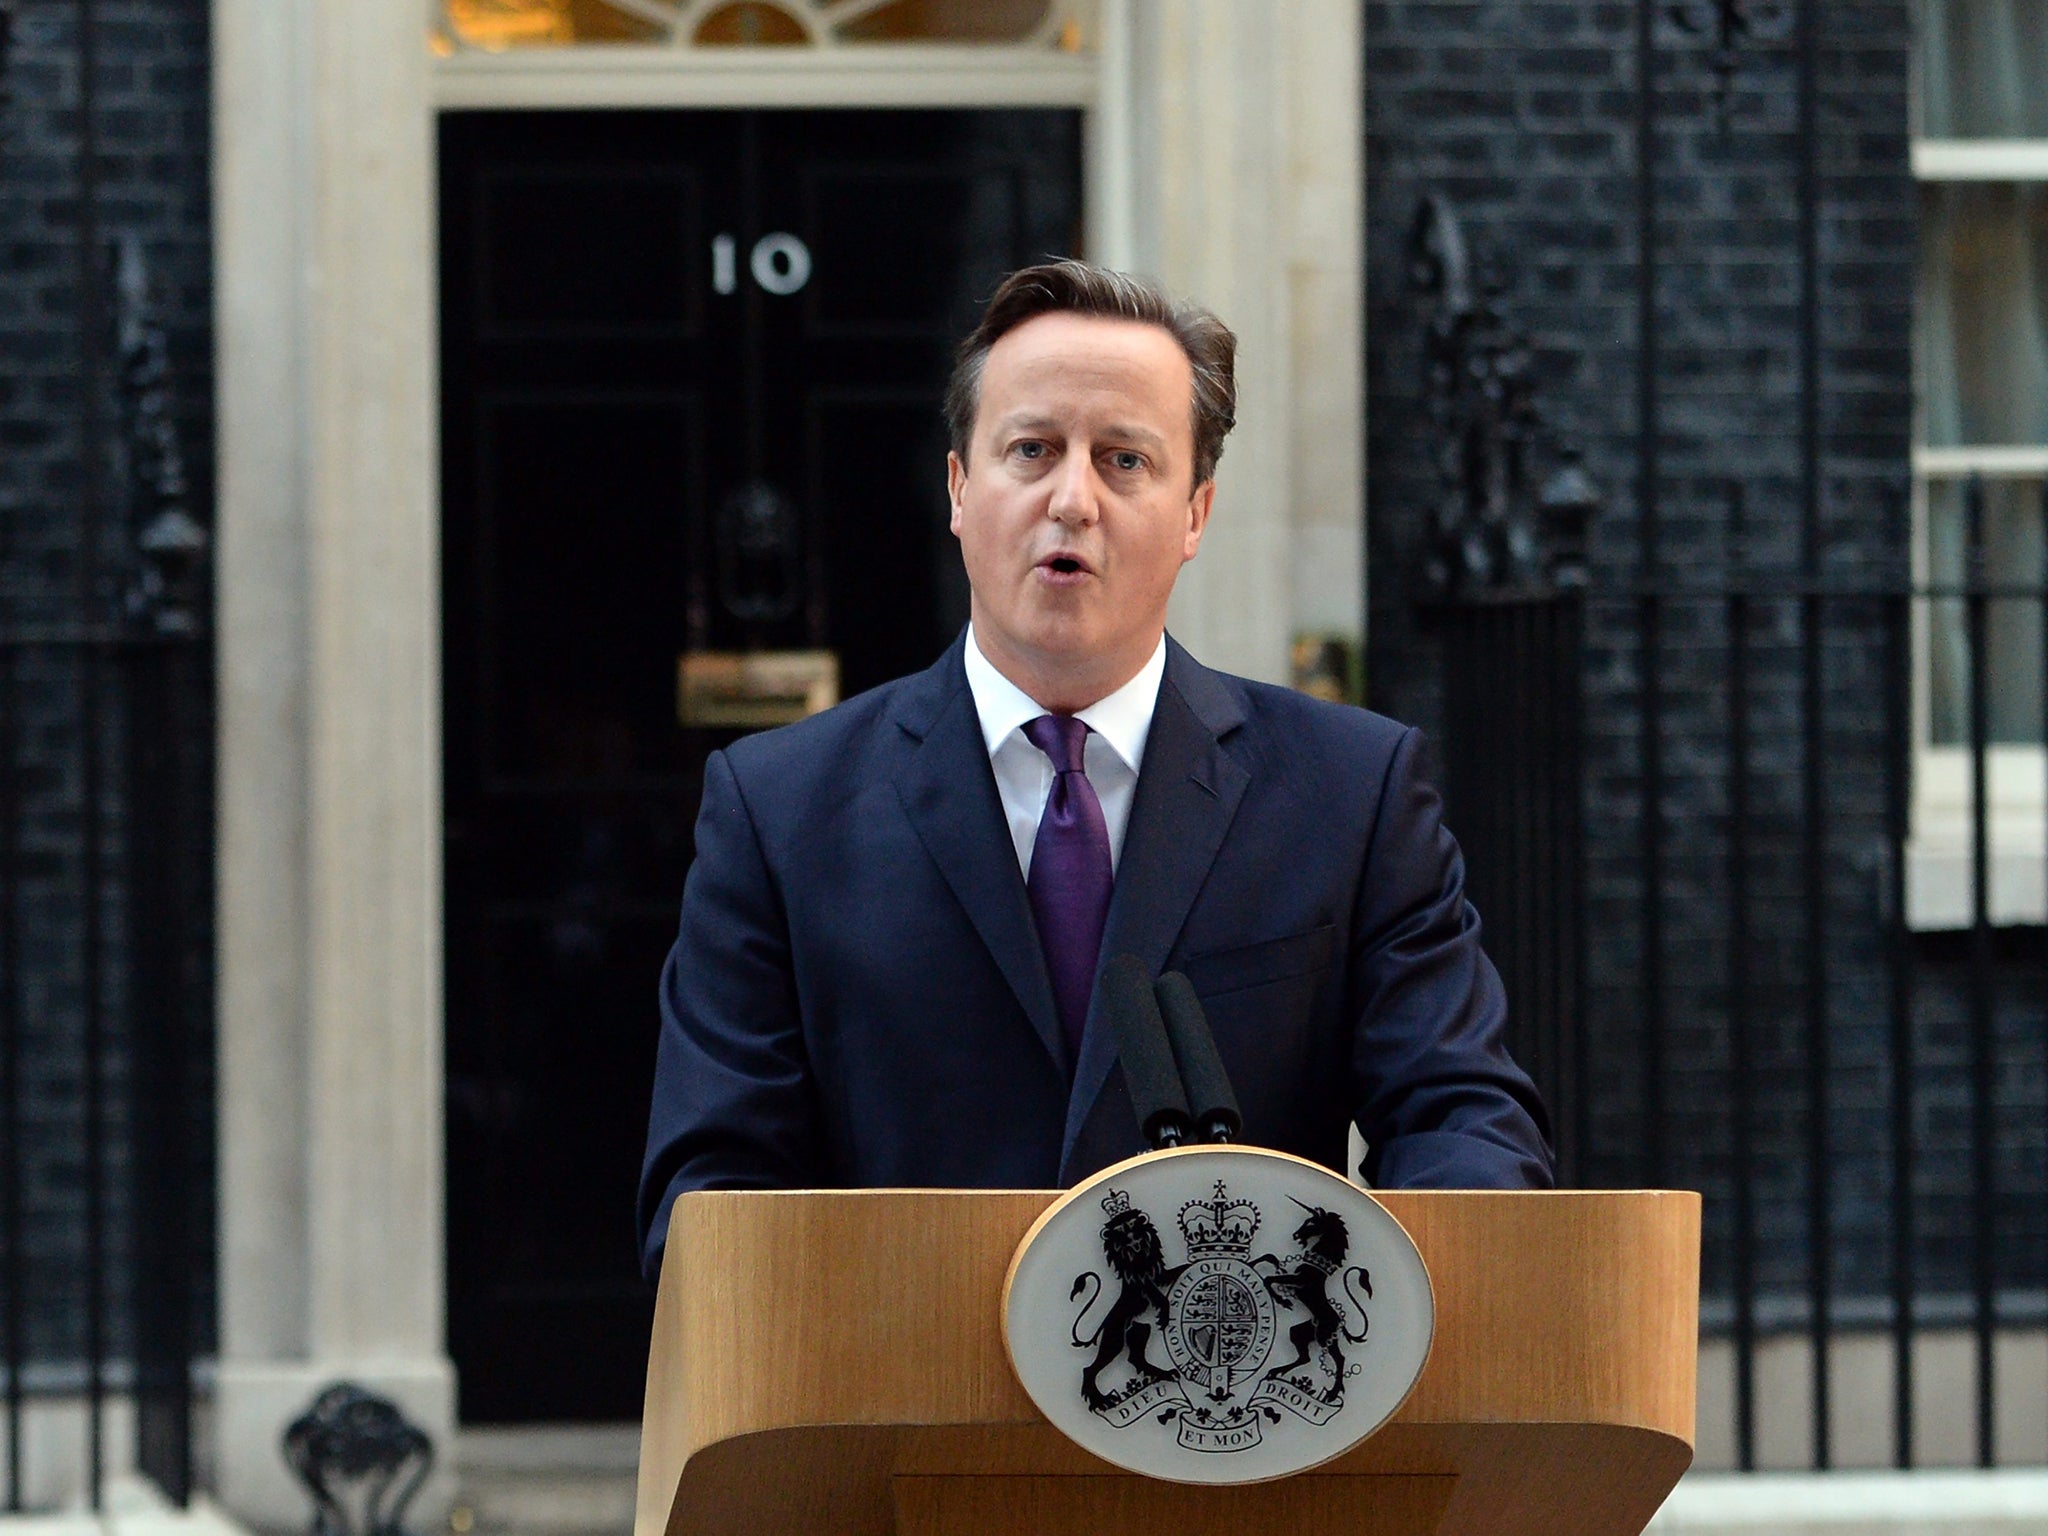 David Cameron signed a “vow” to continue the “Barnett allocation of resources” across the UK